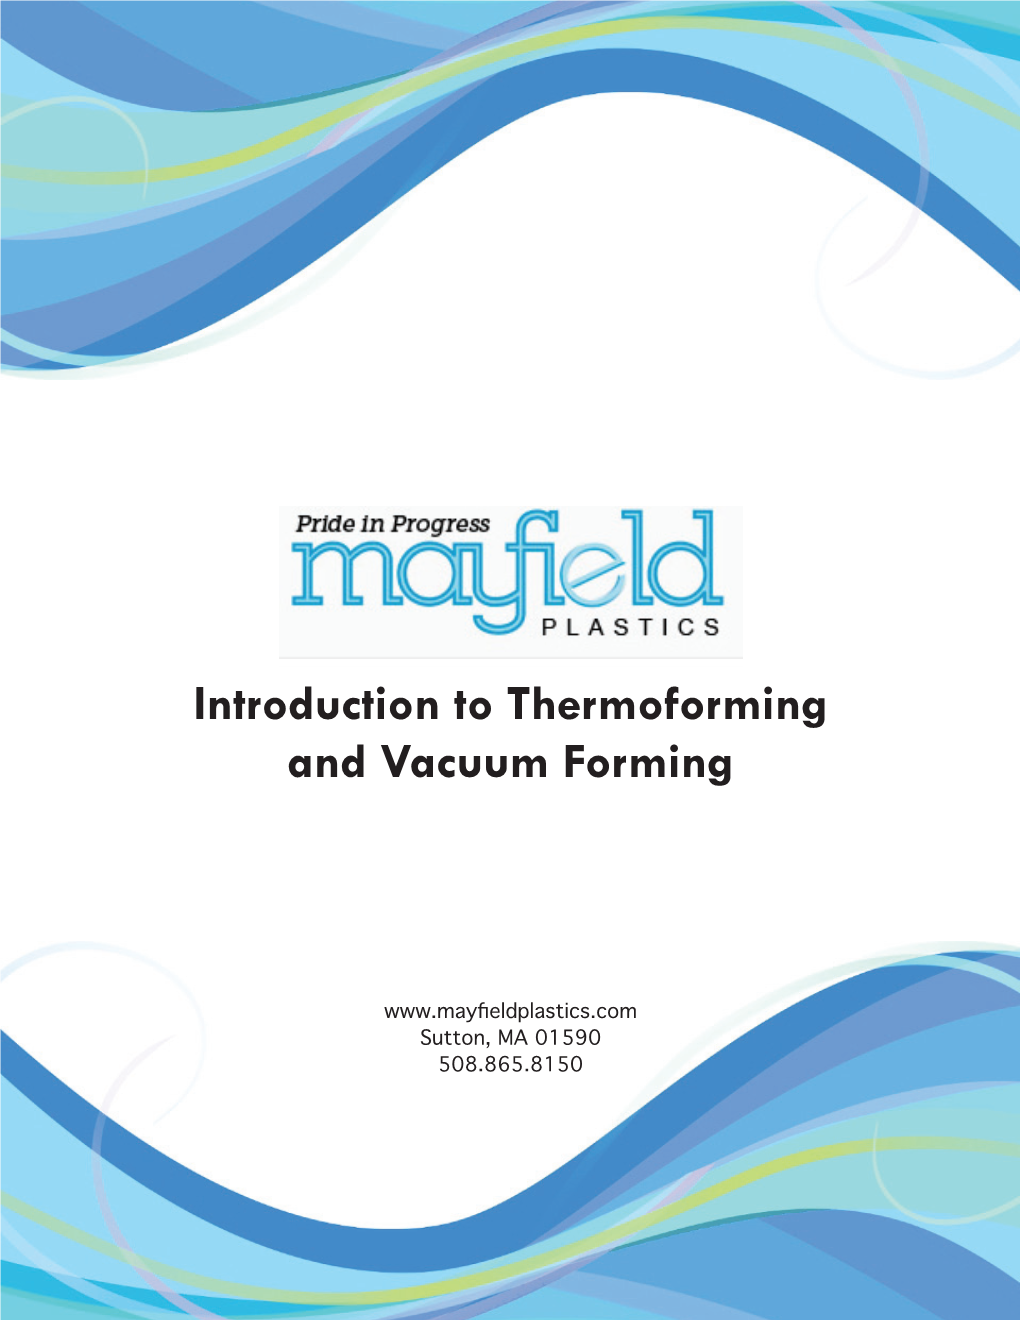 Introduction to Thermoforming and Vacuum Forming